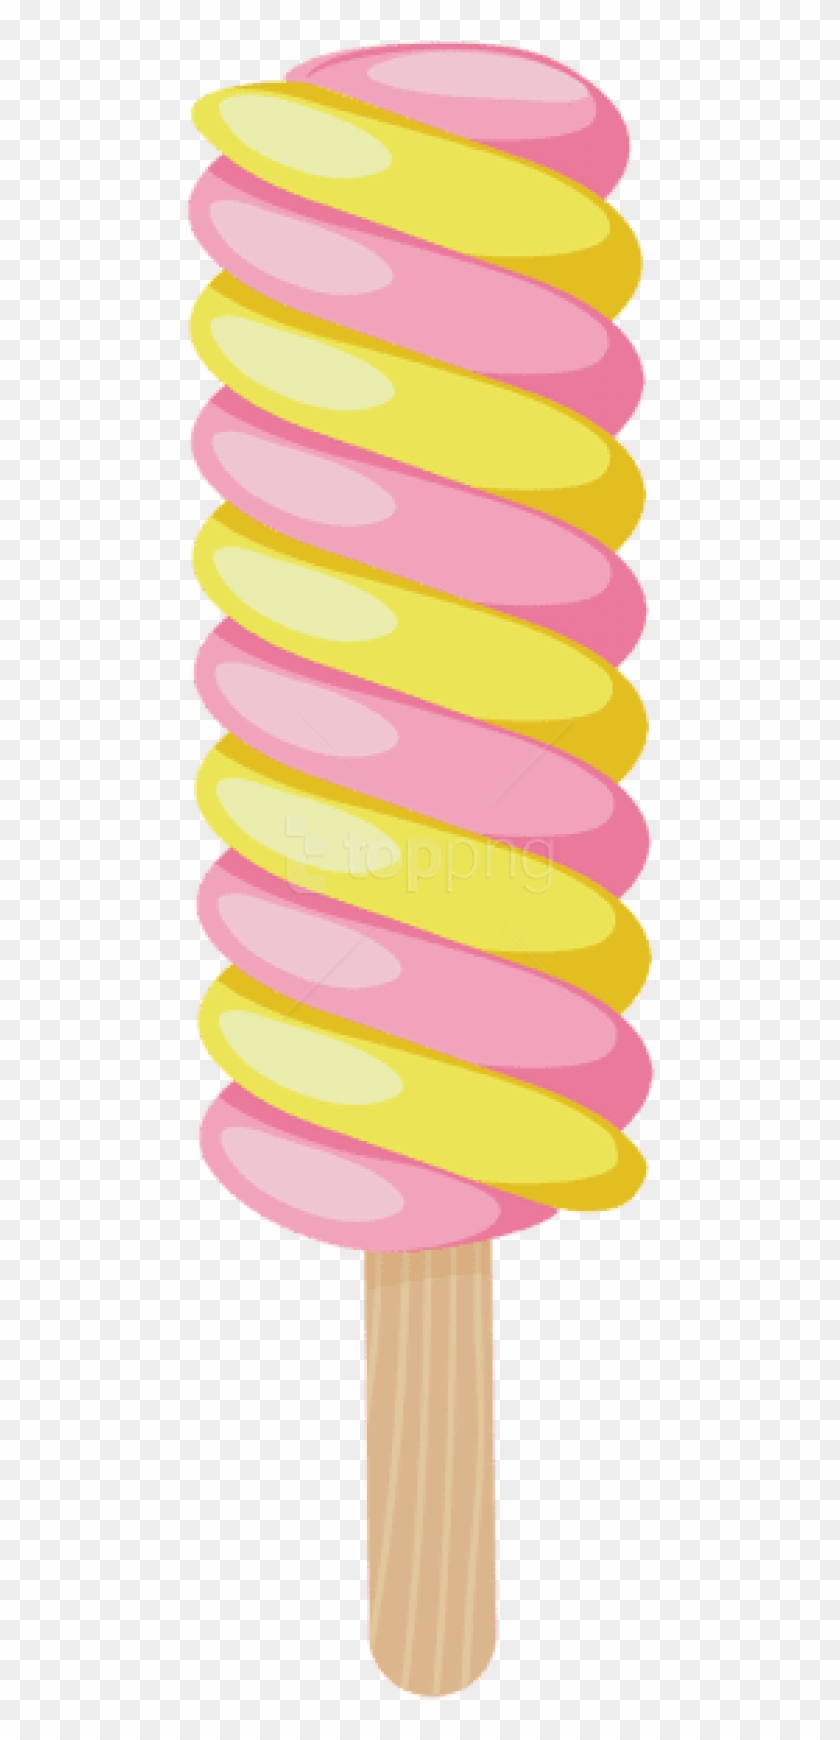 Download Ice Cream Swirl Png Images Background Clipart #1830122